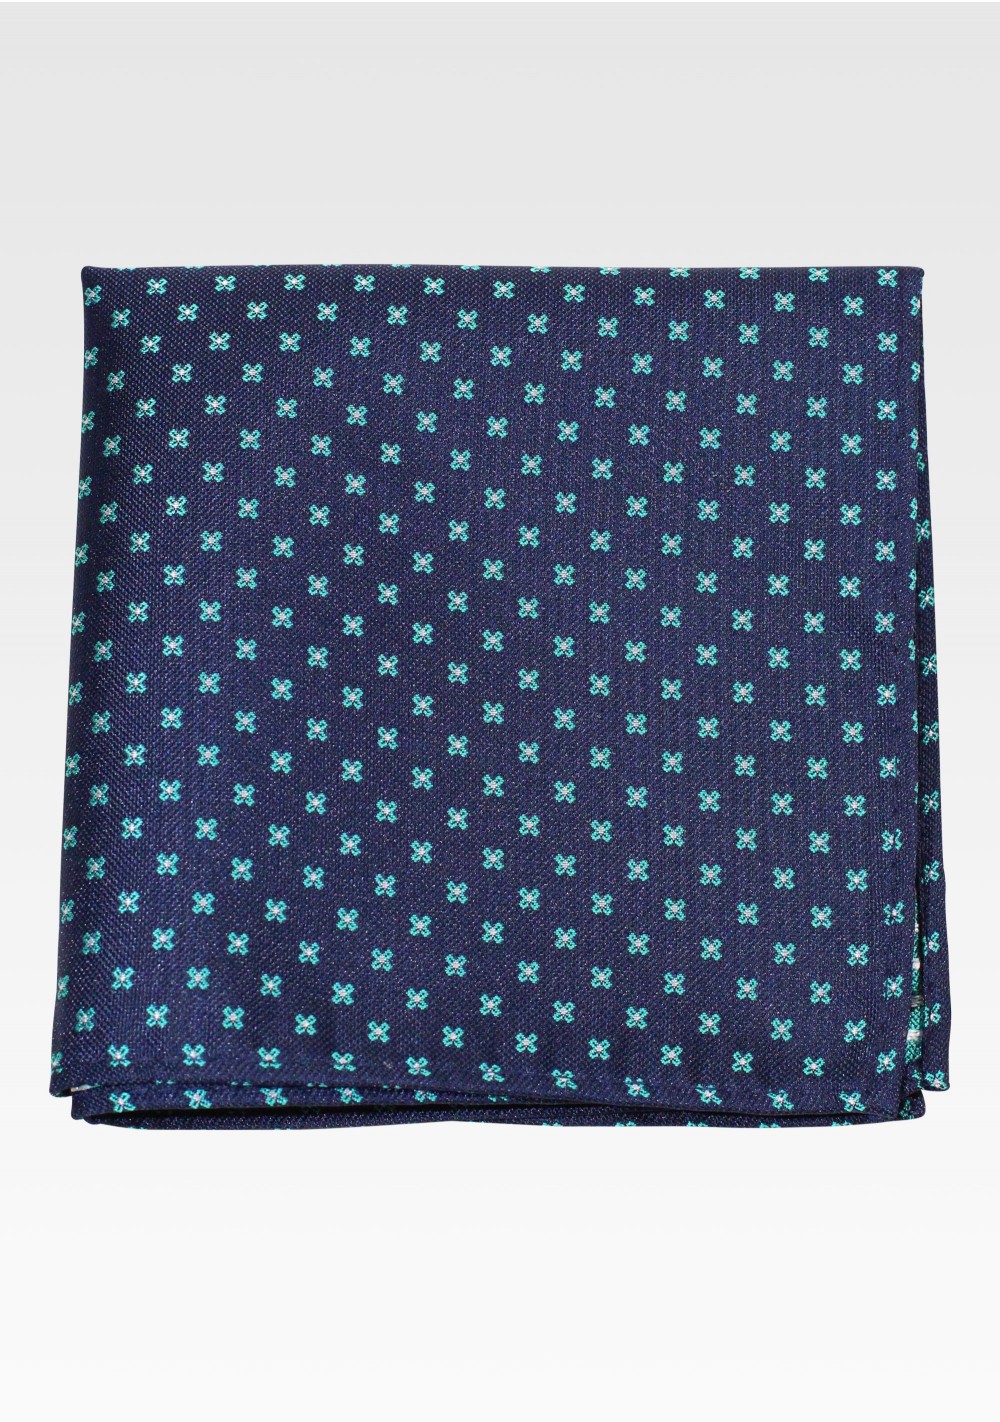 Blue Hanky with Tiny Green Florals